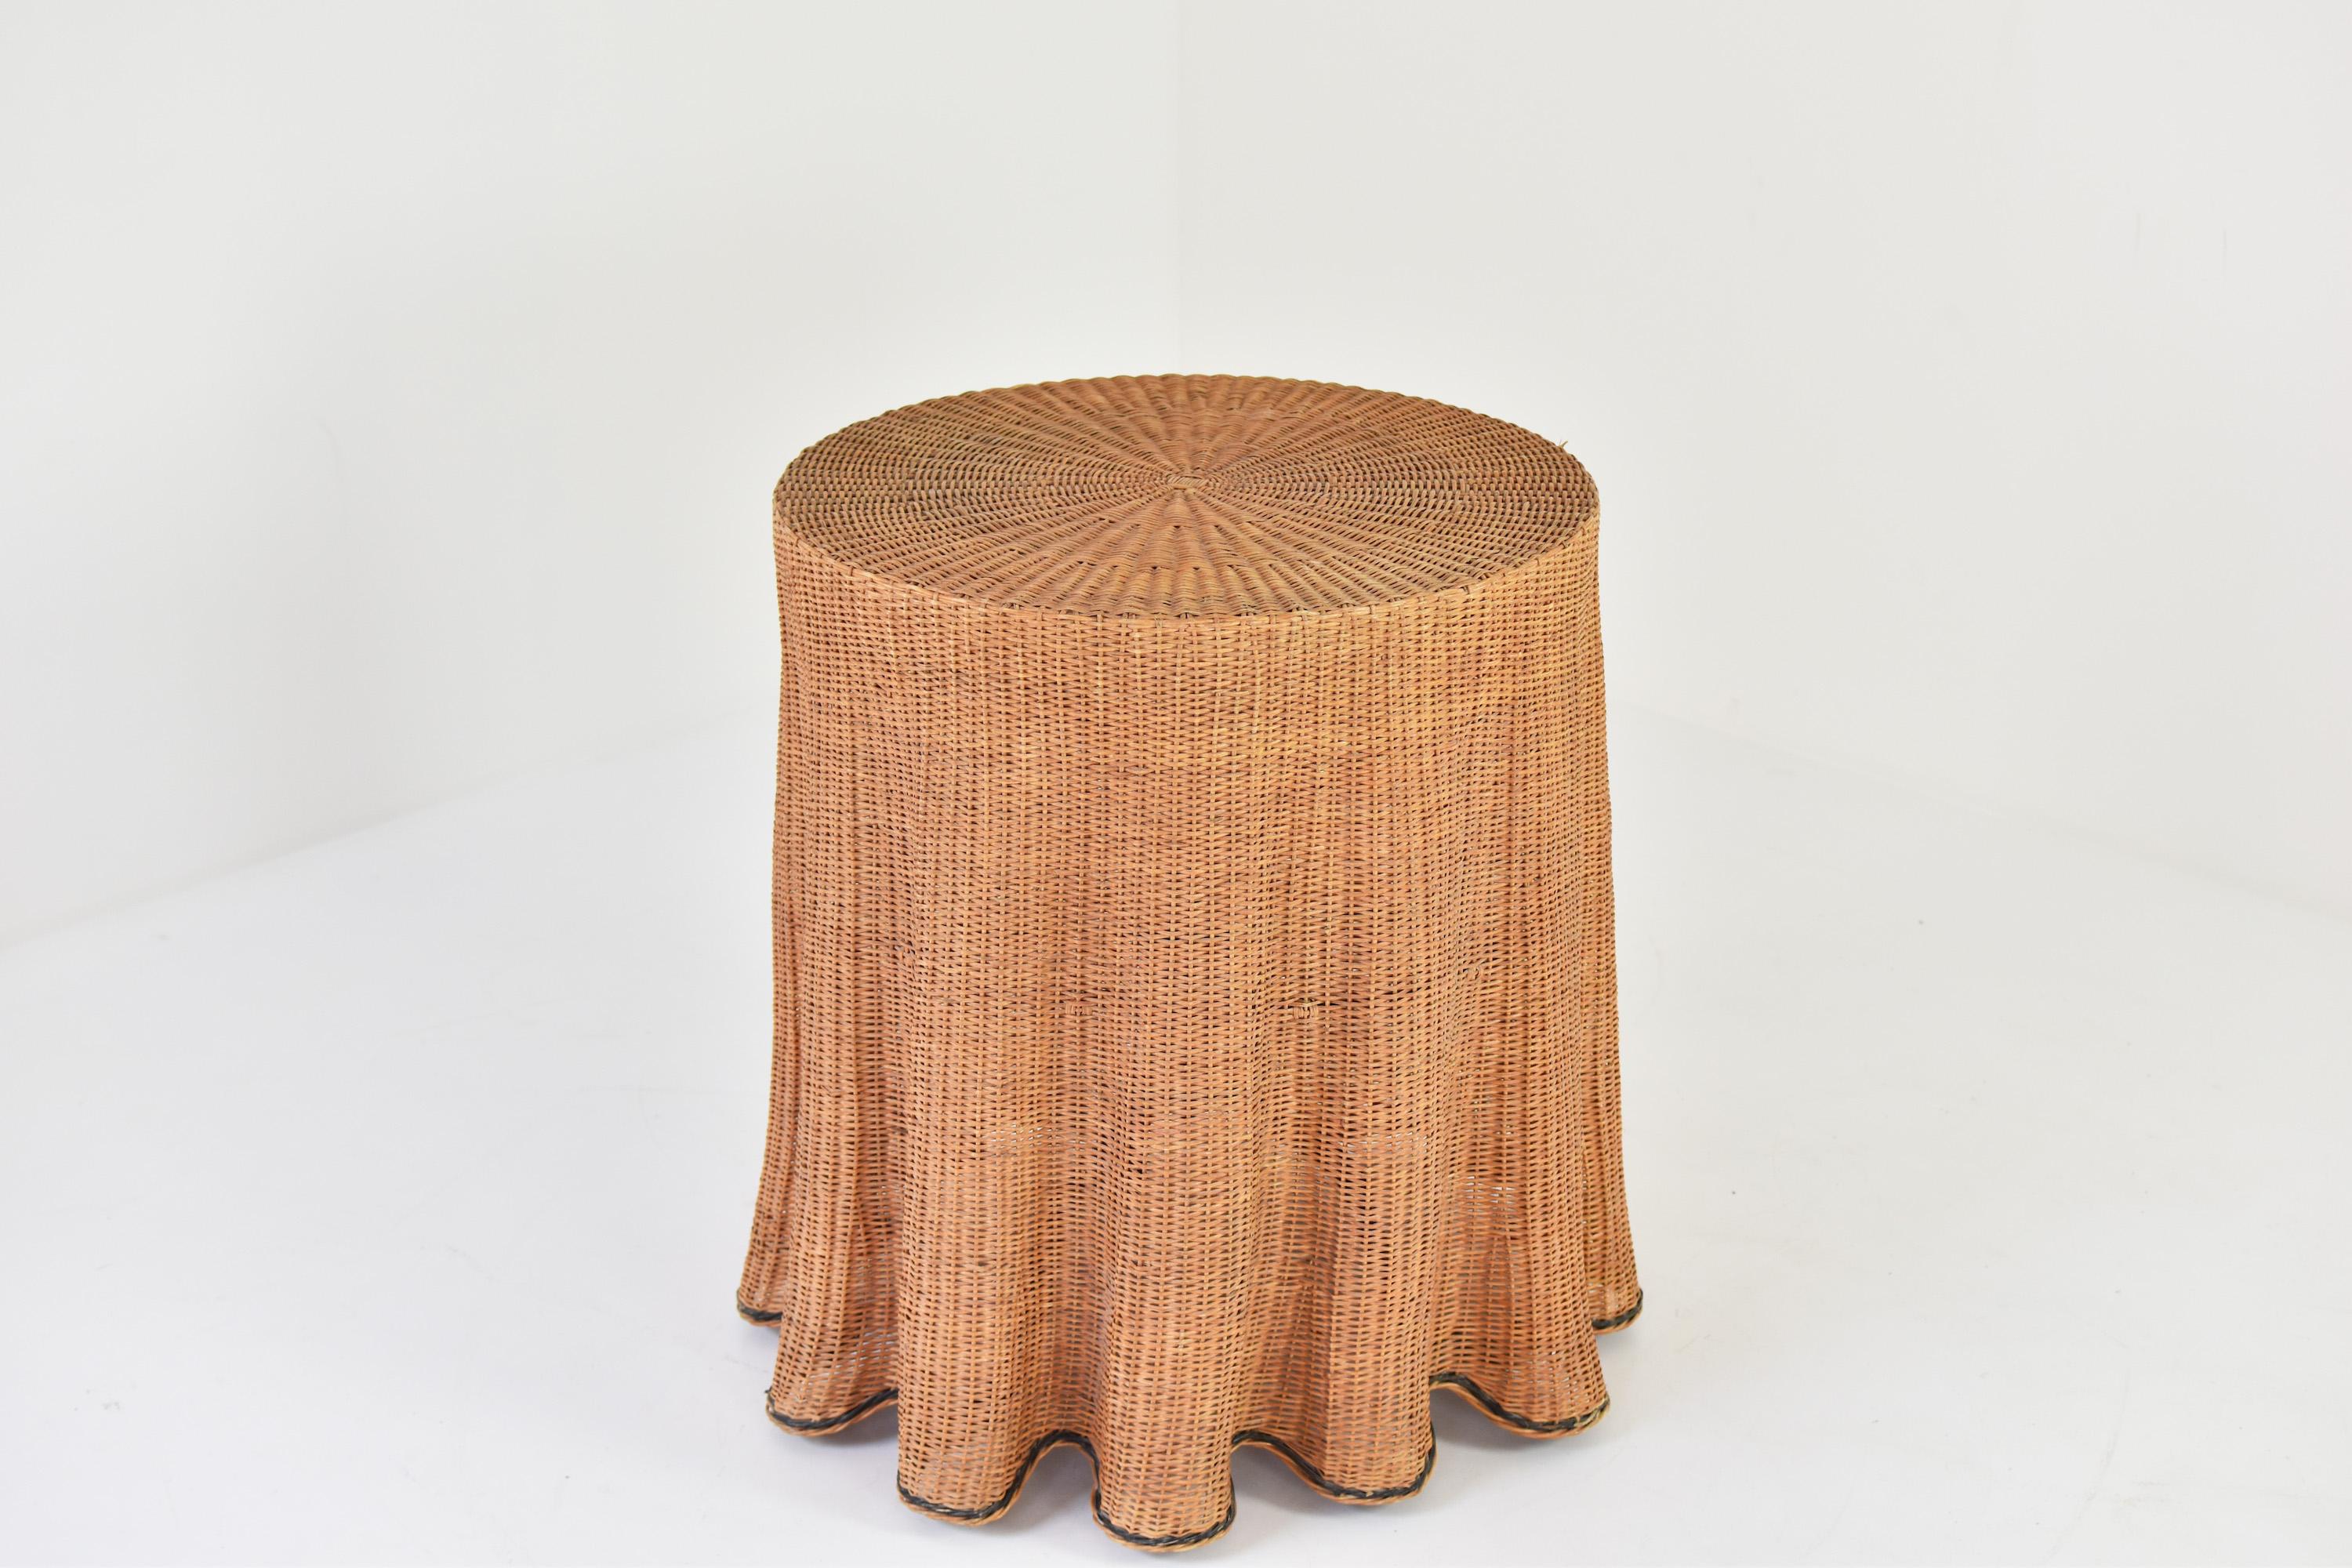 French Trompe L’oeil Wicker Side Table with ‘Draped’ Illusion from France, 1970’s